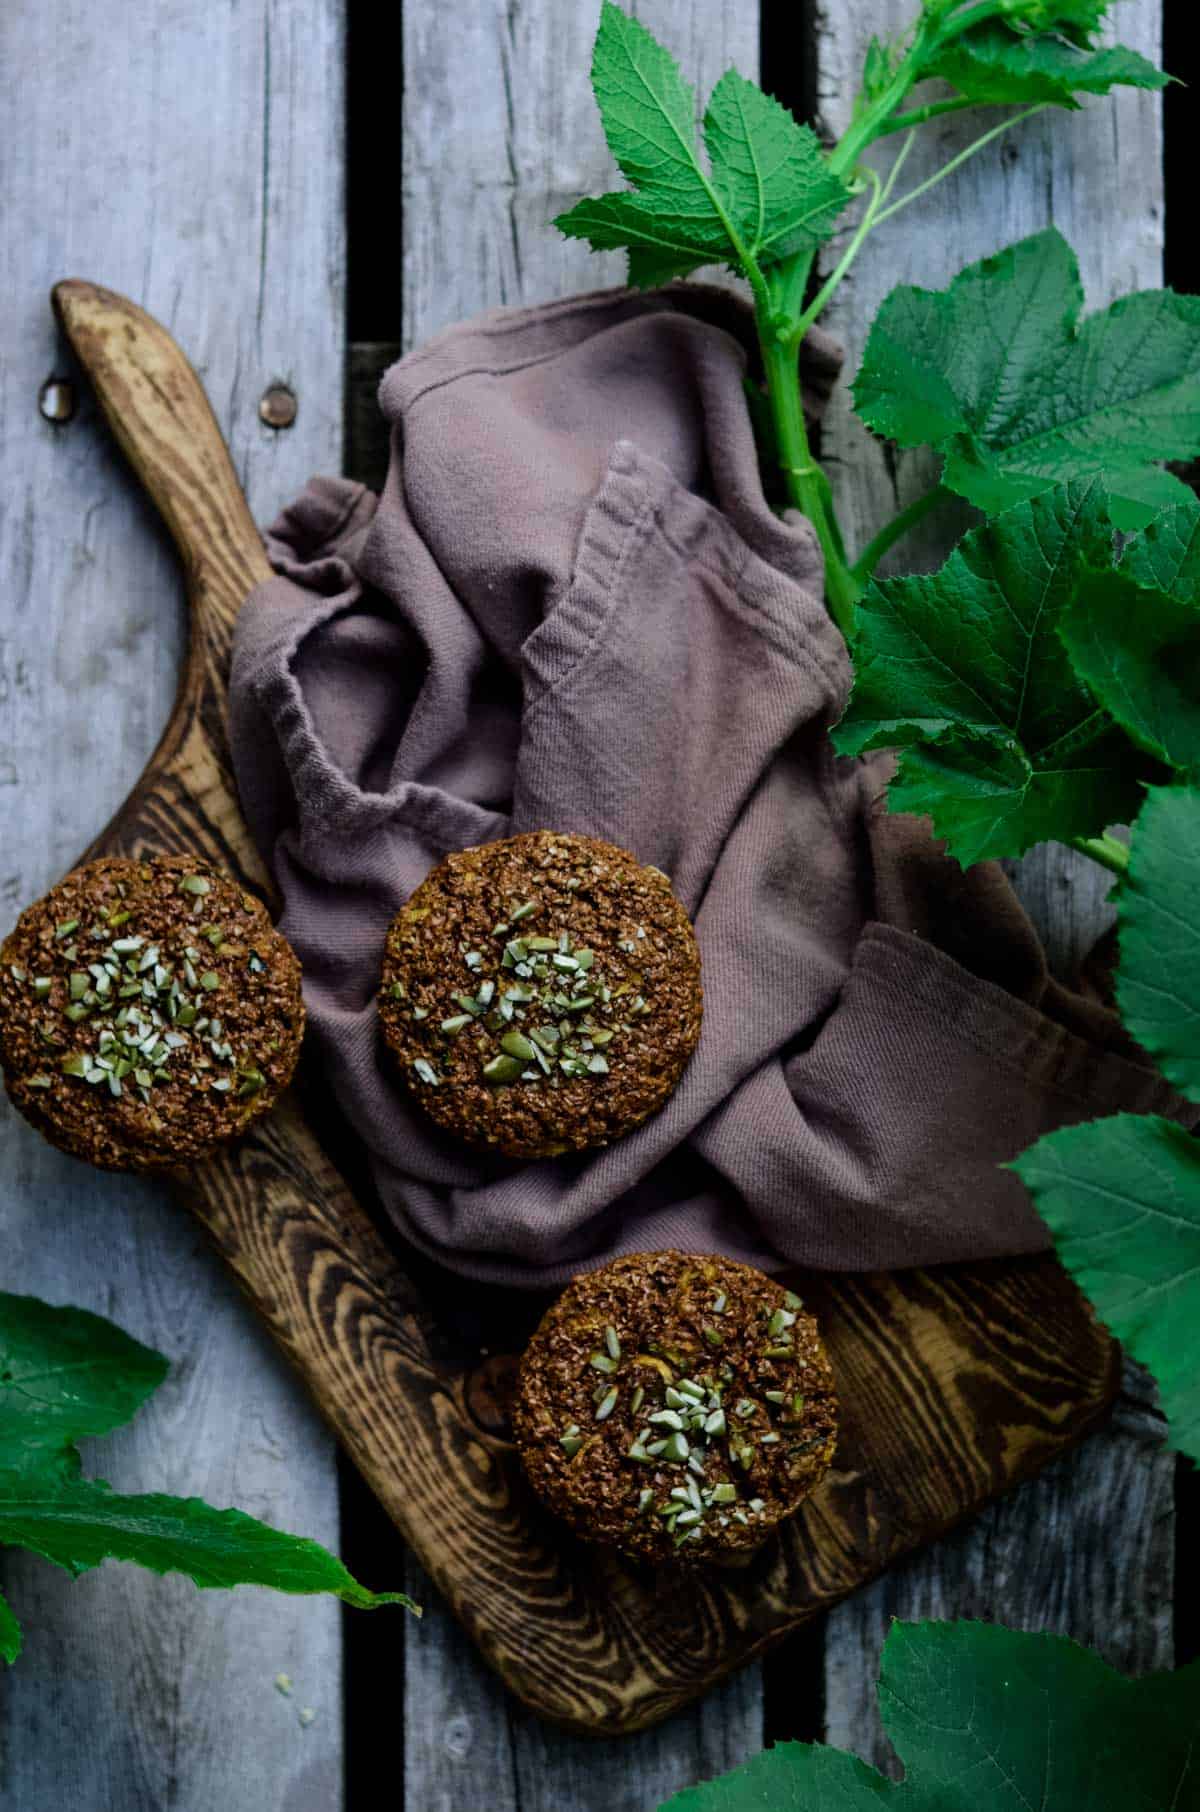 Zucchini Bran Muffins on a wooden serving board surrounded by green zucchini leaves of the plant.